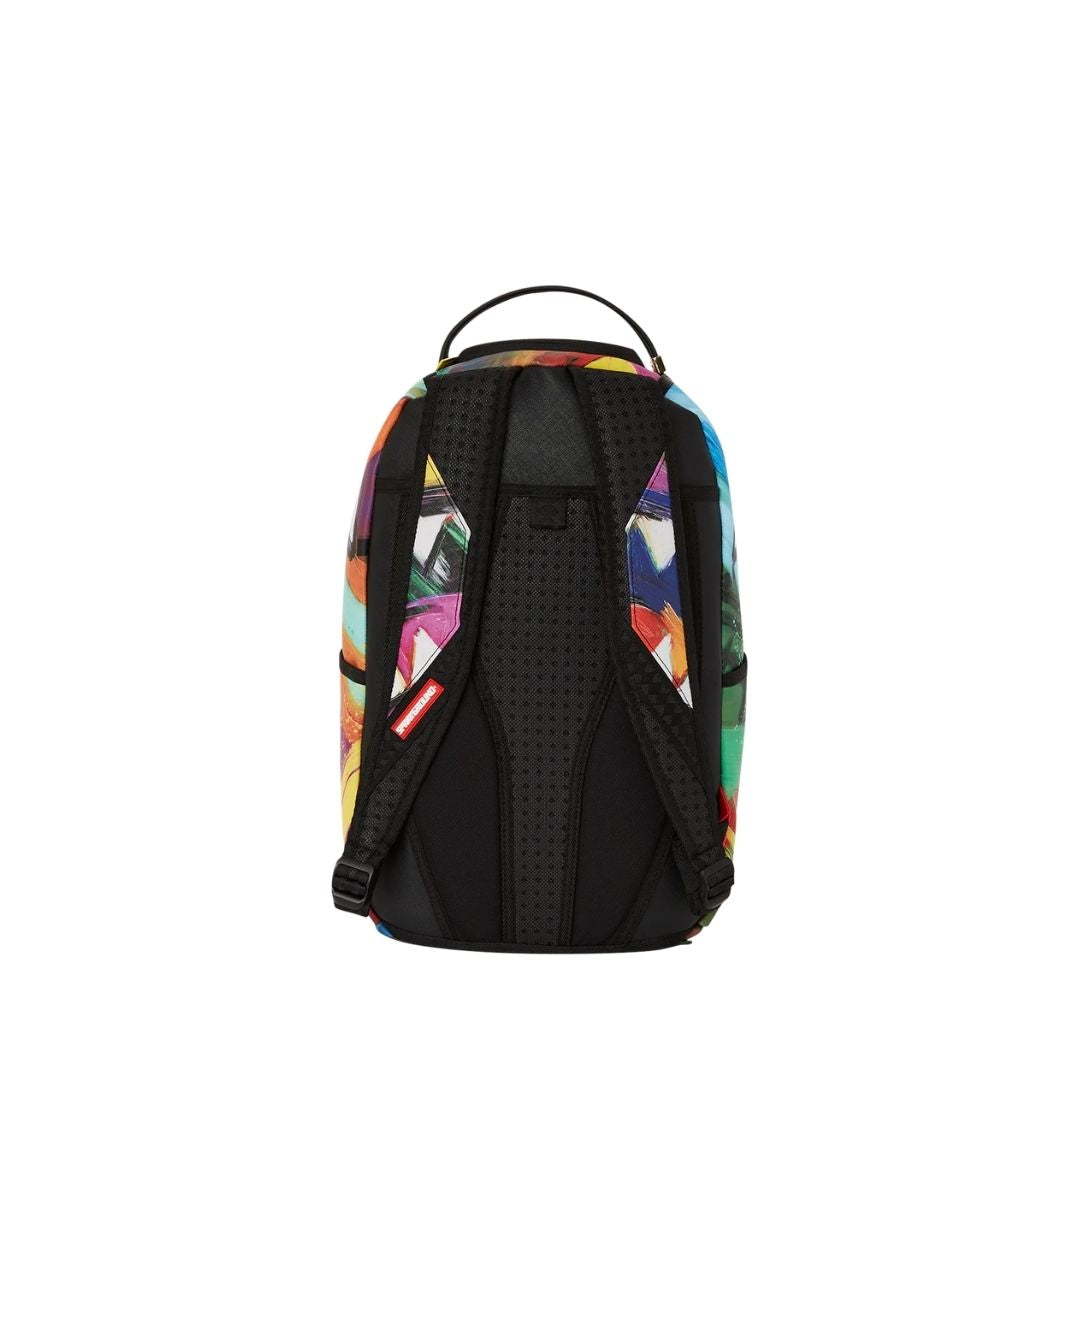 SHARKS IN PAINT BACKPACK